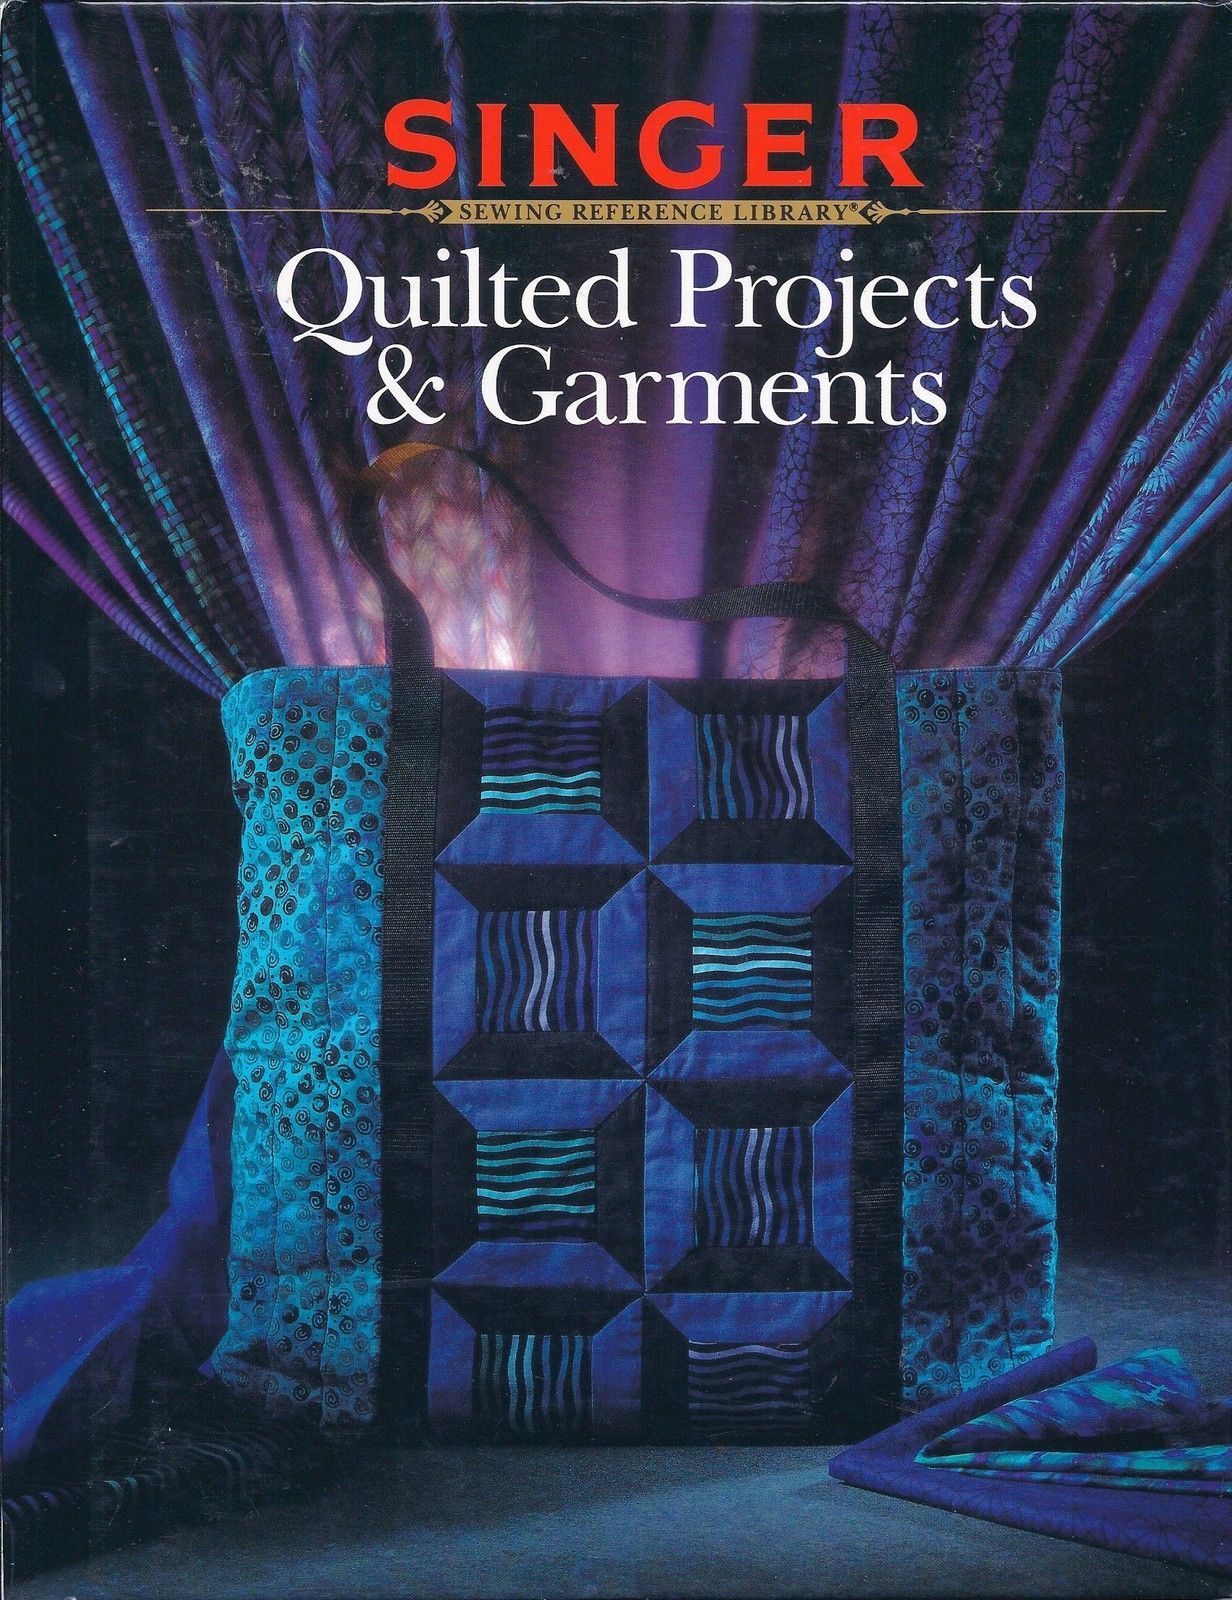 Singer Quilted Projects & Garments Book - $1.50